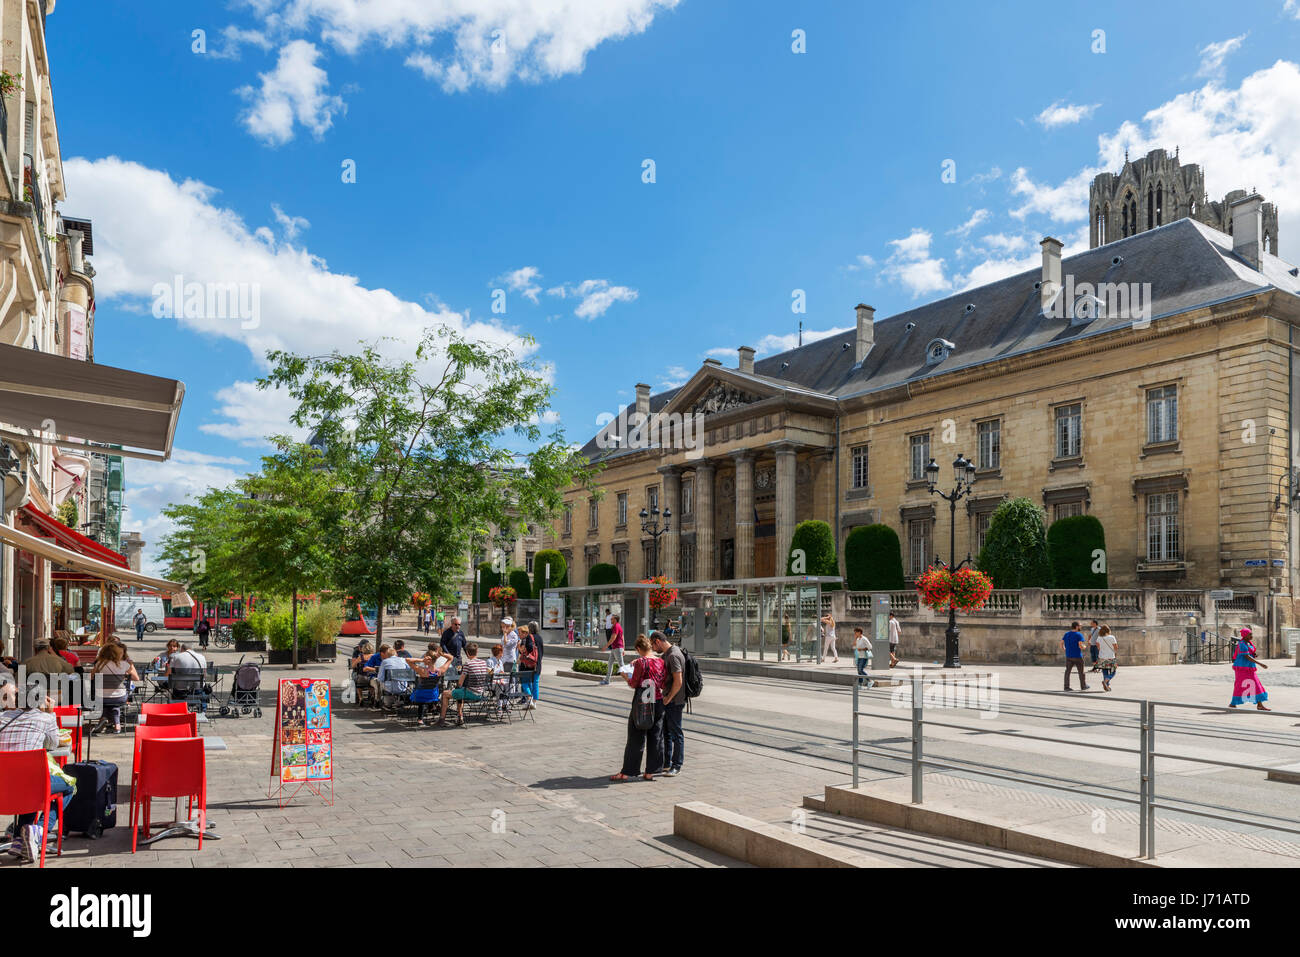 Cafe and shops looking towards the Palace of Justice (Tribunal de Grande Instance de Reims) in the city centre, Place Myron Herrick, Reims, France Stock Photo